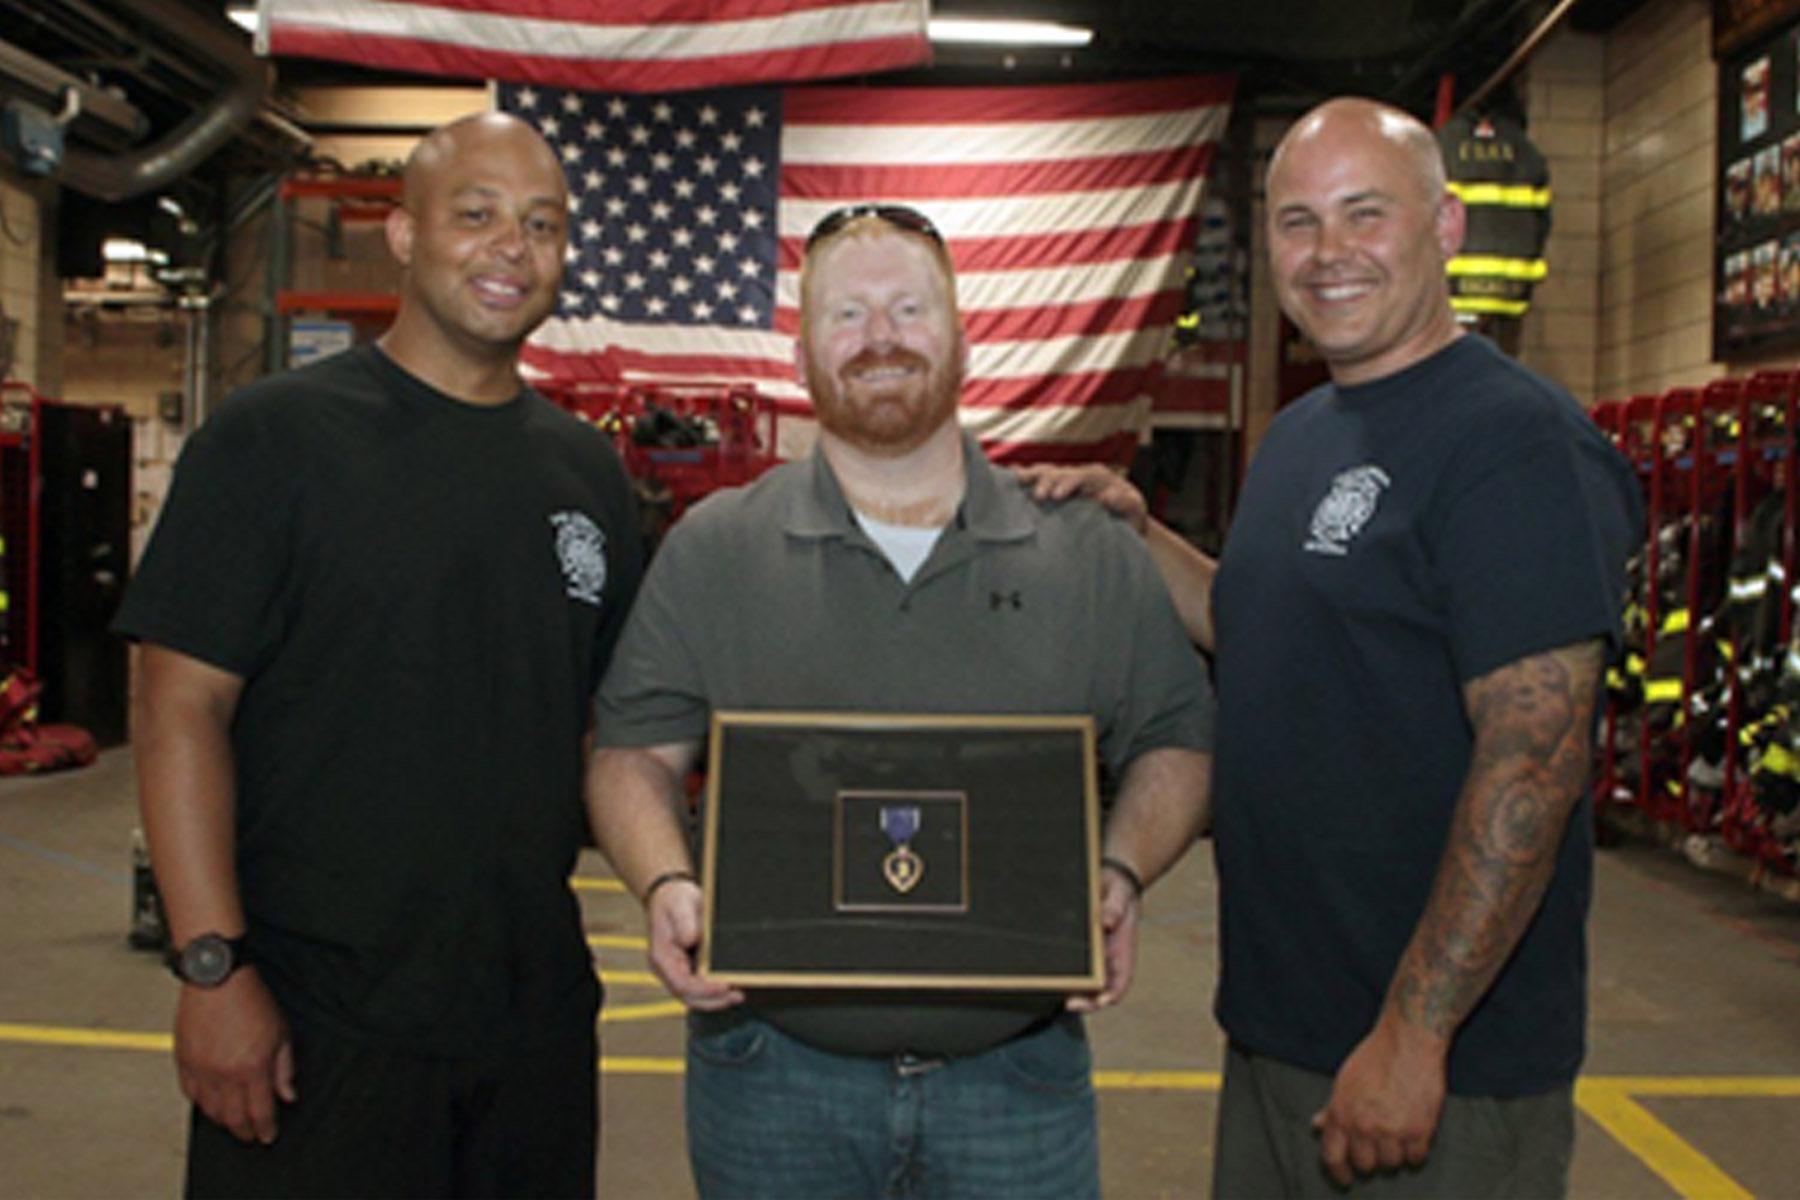 Charles Wayne O'Brien, purple heart recipient, giving his medal to the NYC Firefighter Station 54 - example of a symbol